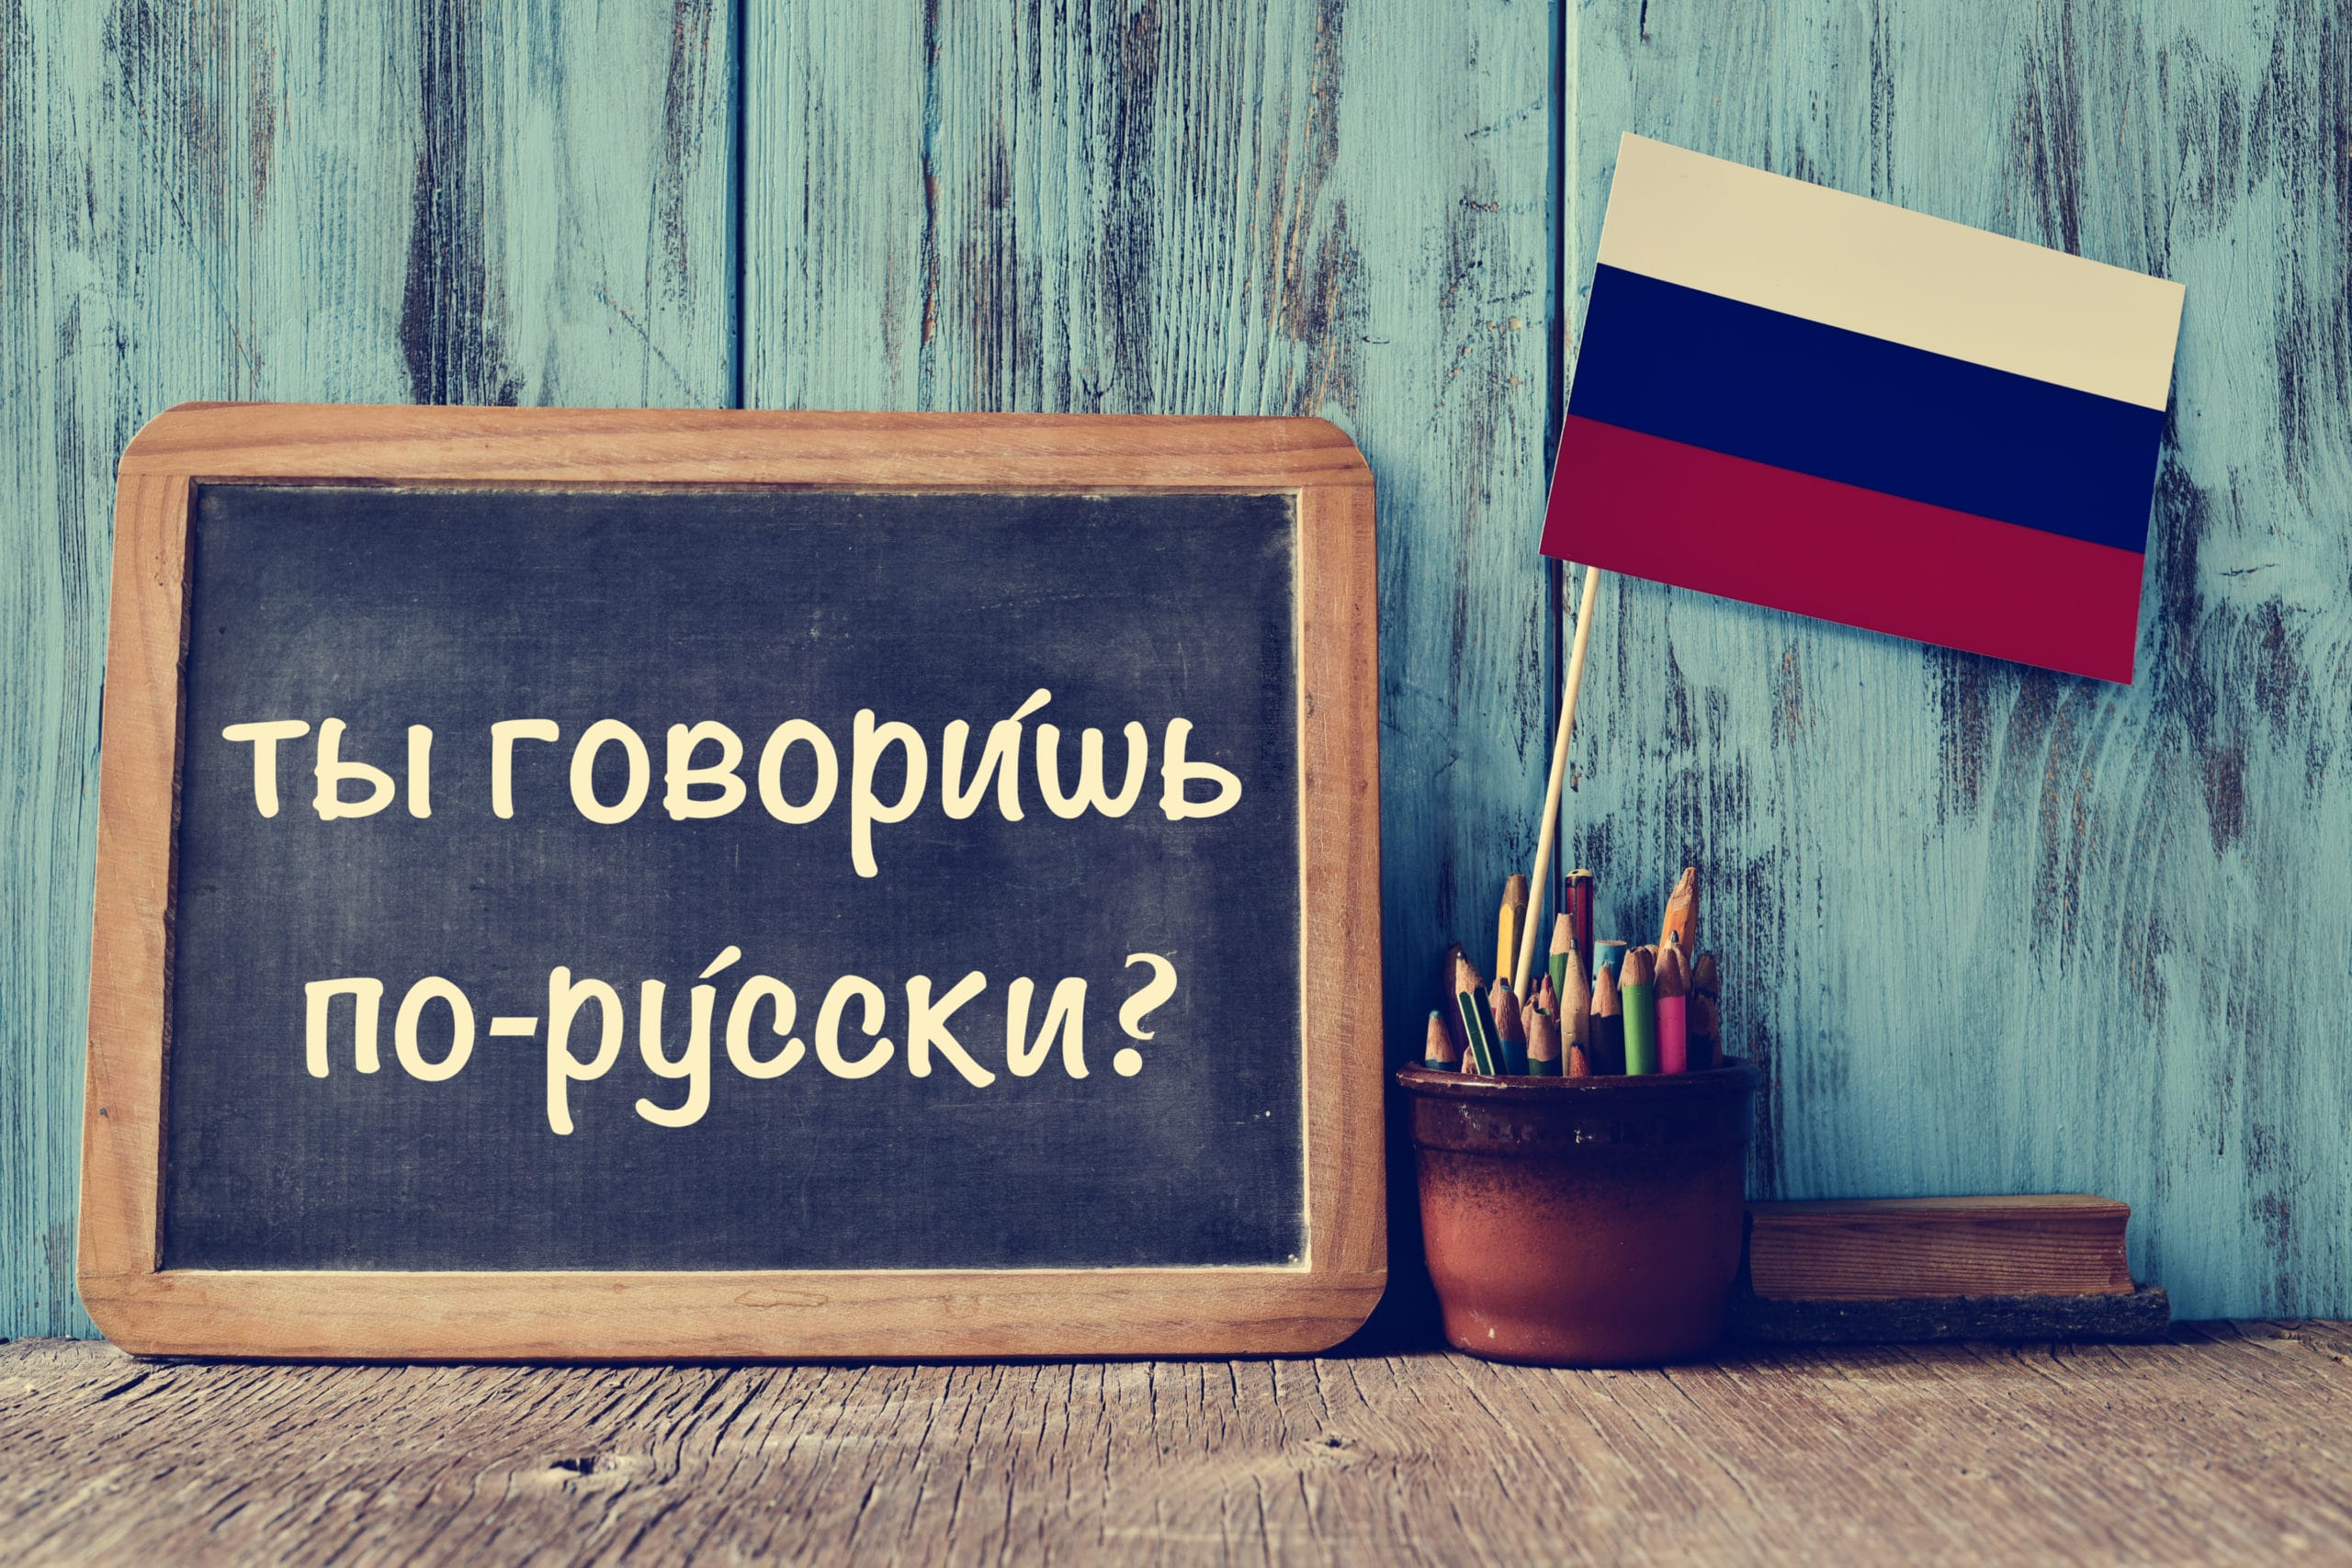 Basic Russian Words and Phrases for Beginners